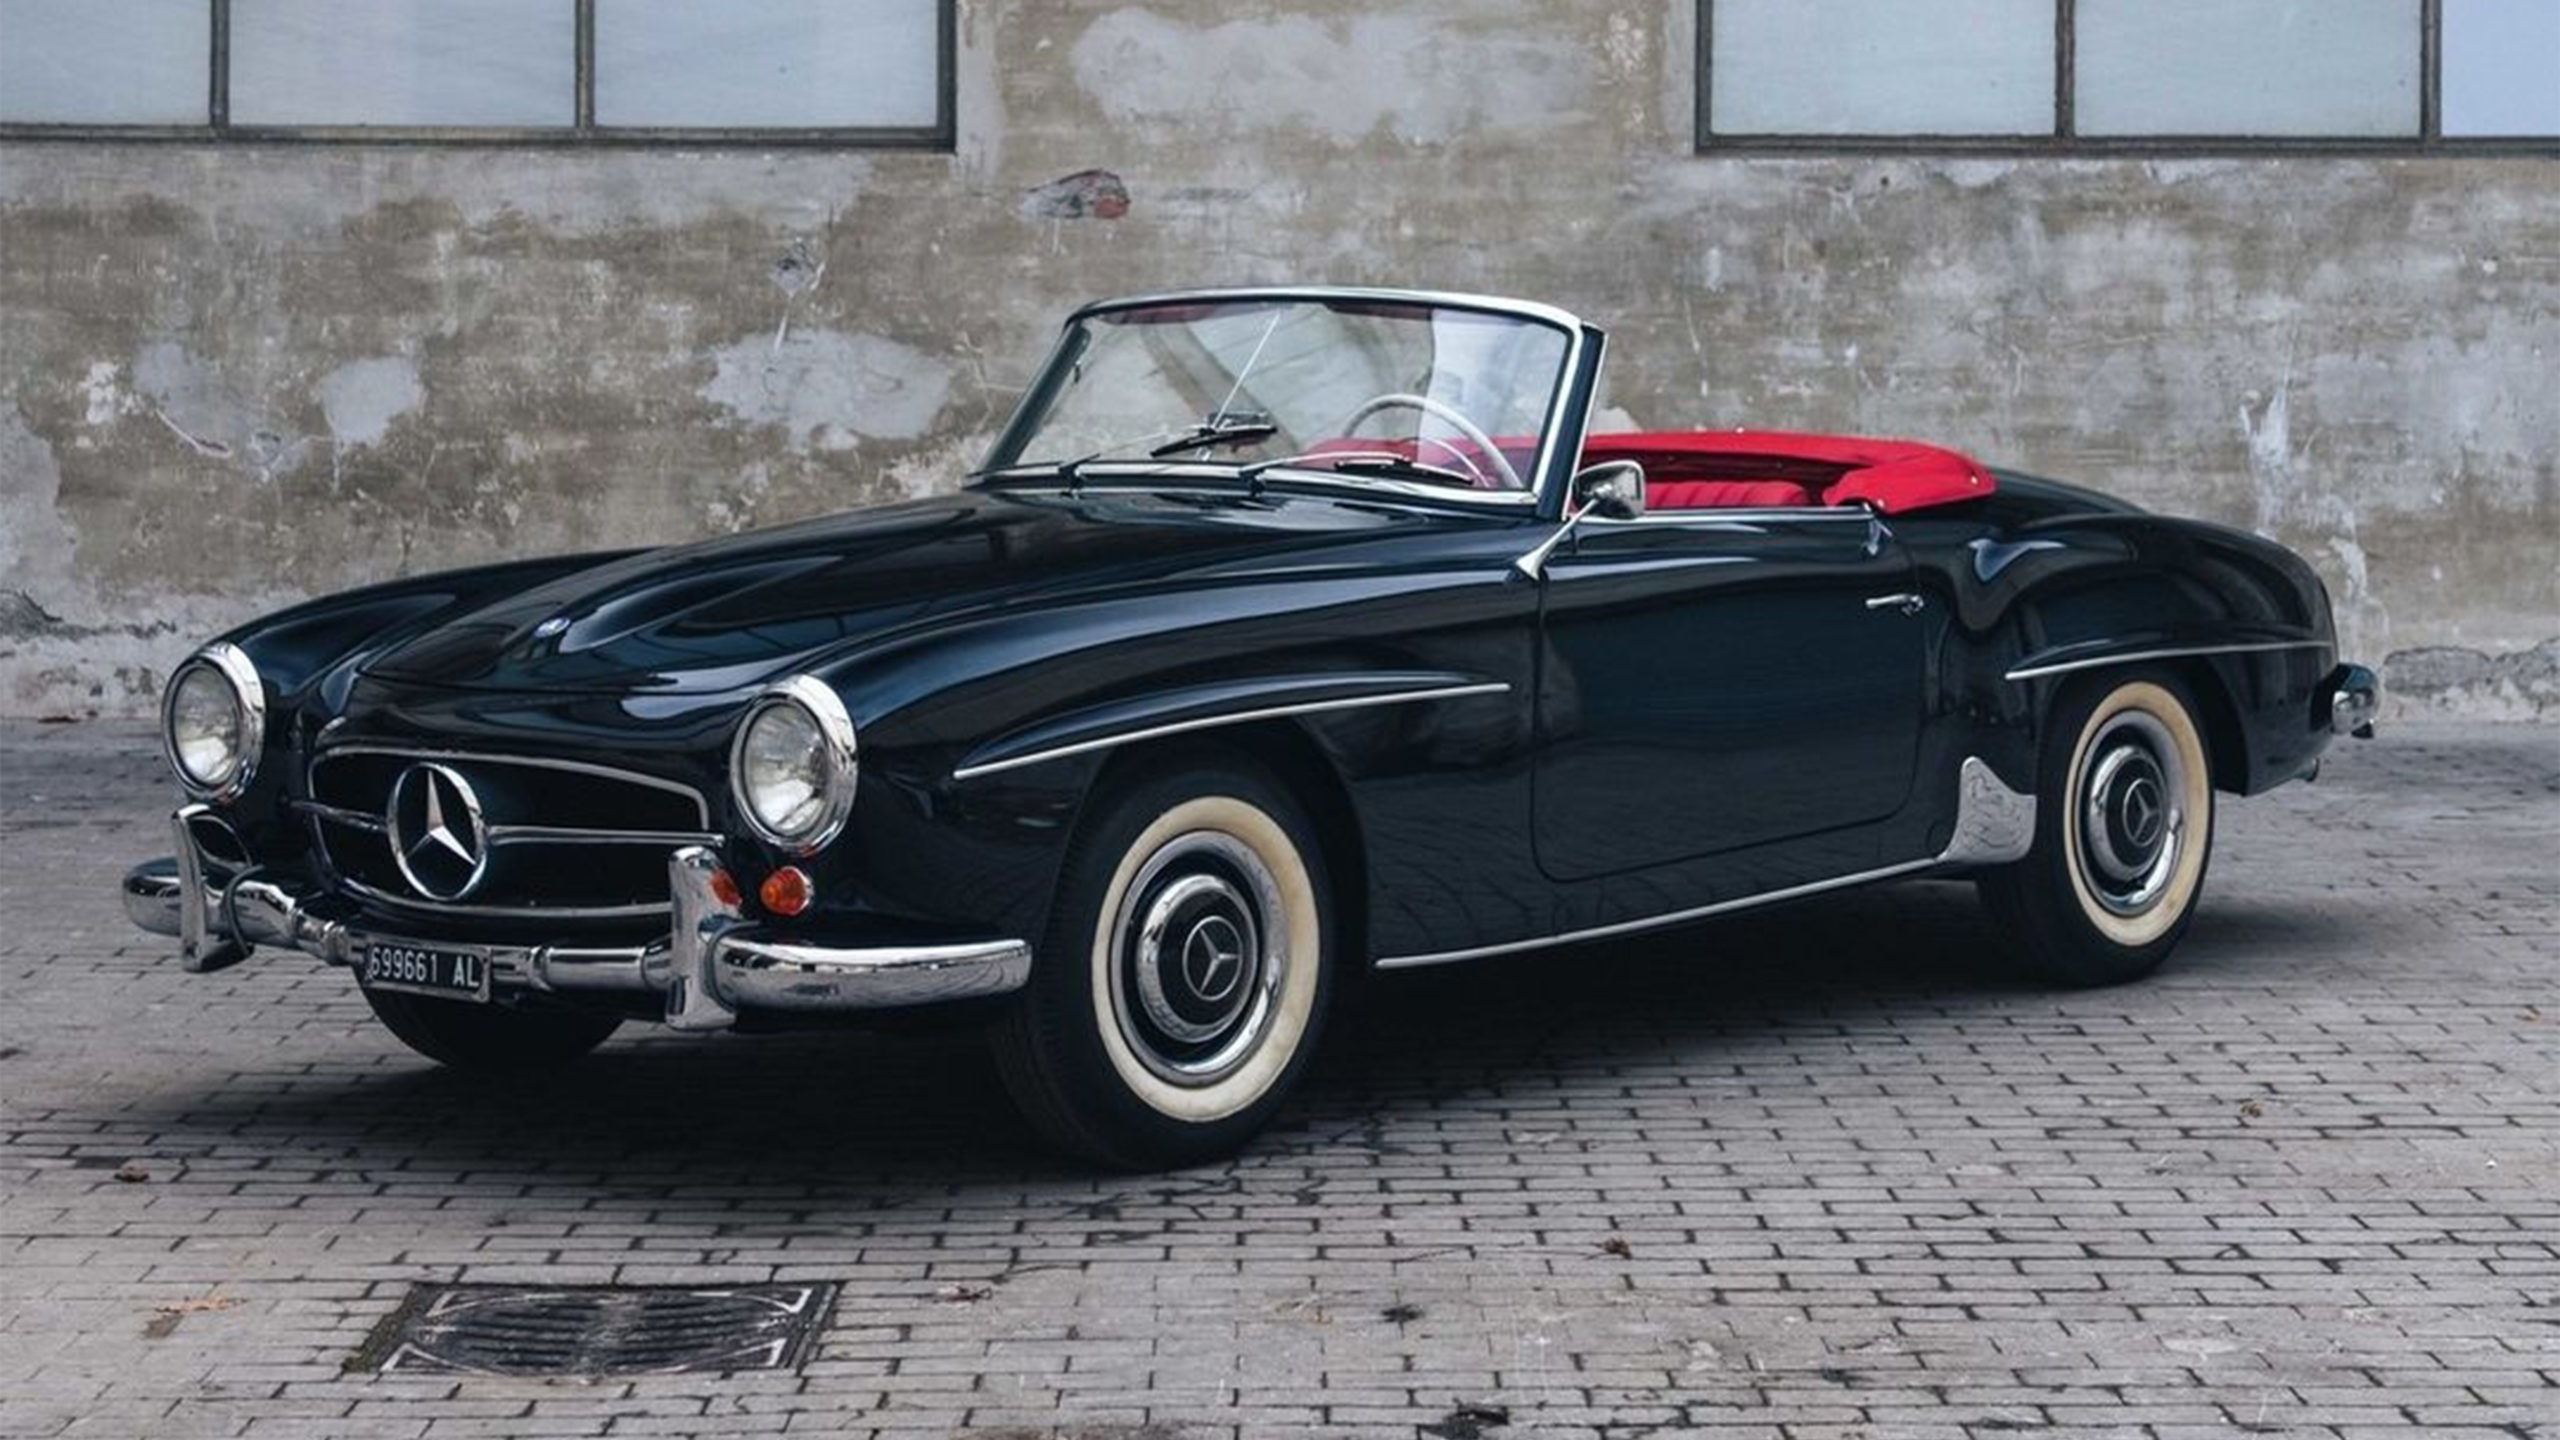 The Mercedes-Benz 190 SL Roadster: A Classic Car that Continues to Impress